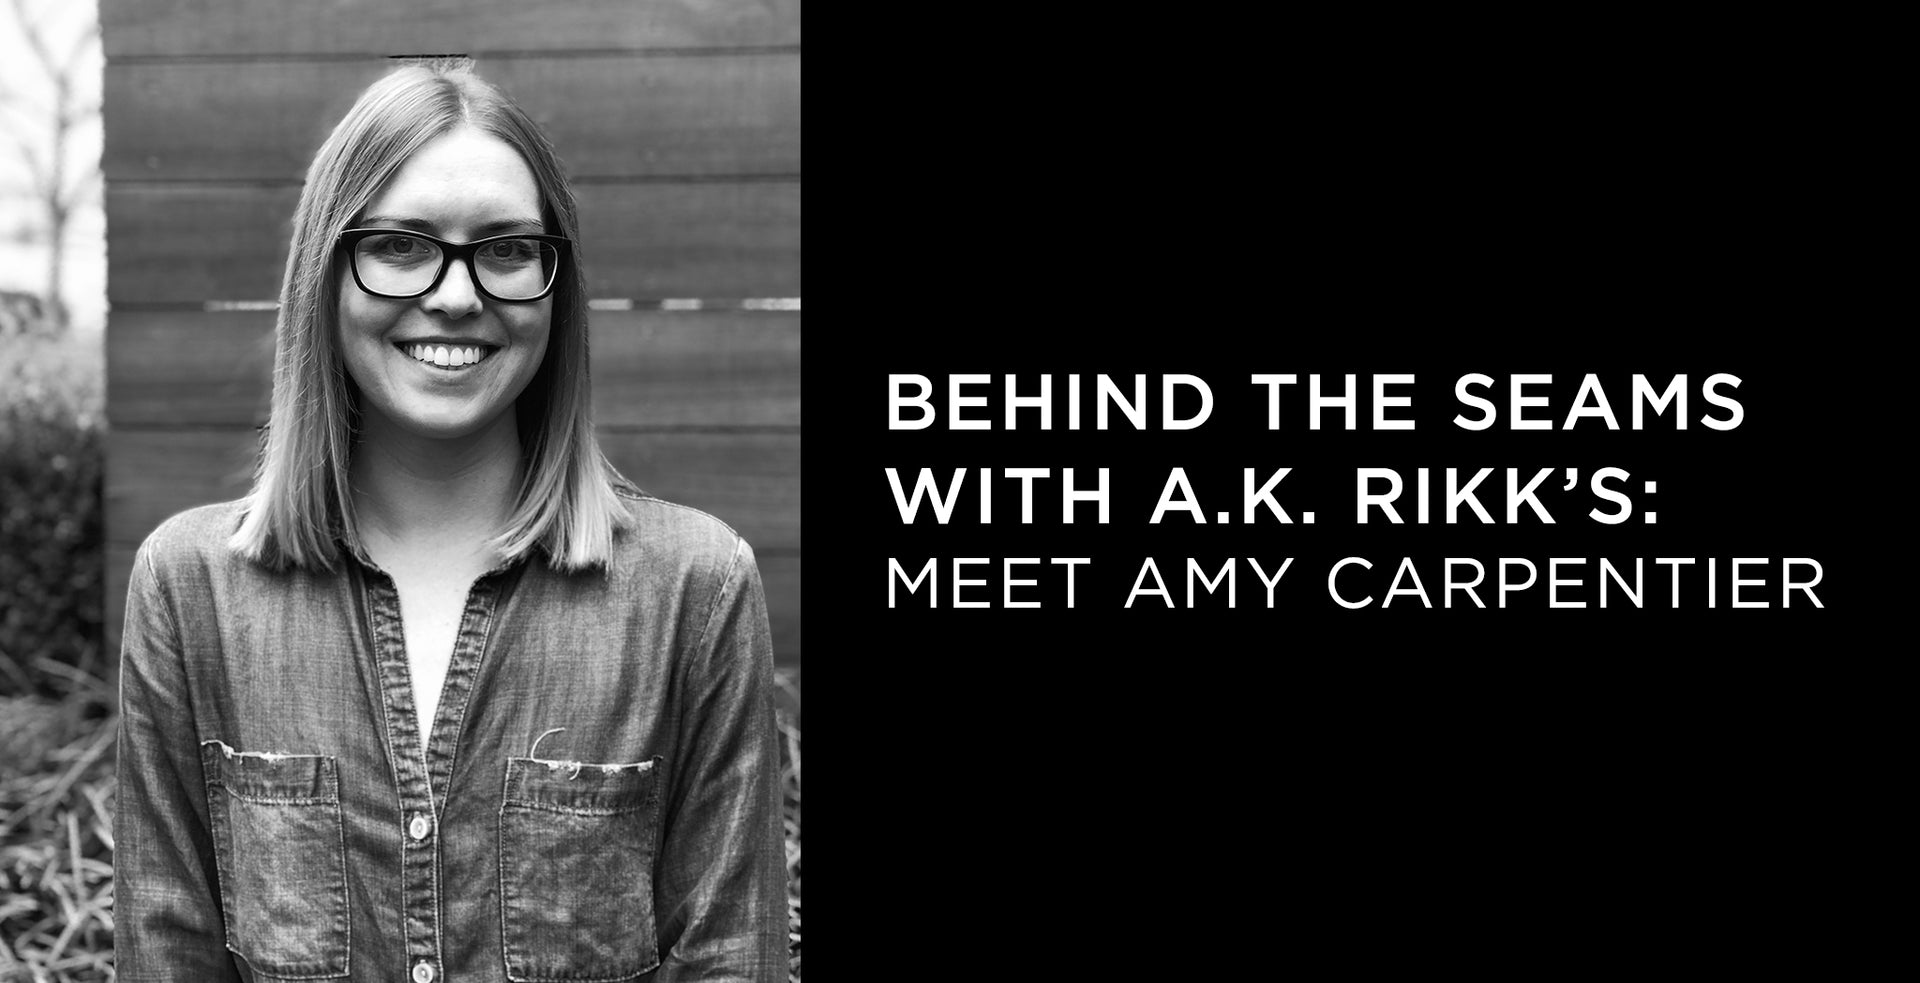 Behind the Seams with A.K. Rikk's: Meet Amy Carpentier